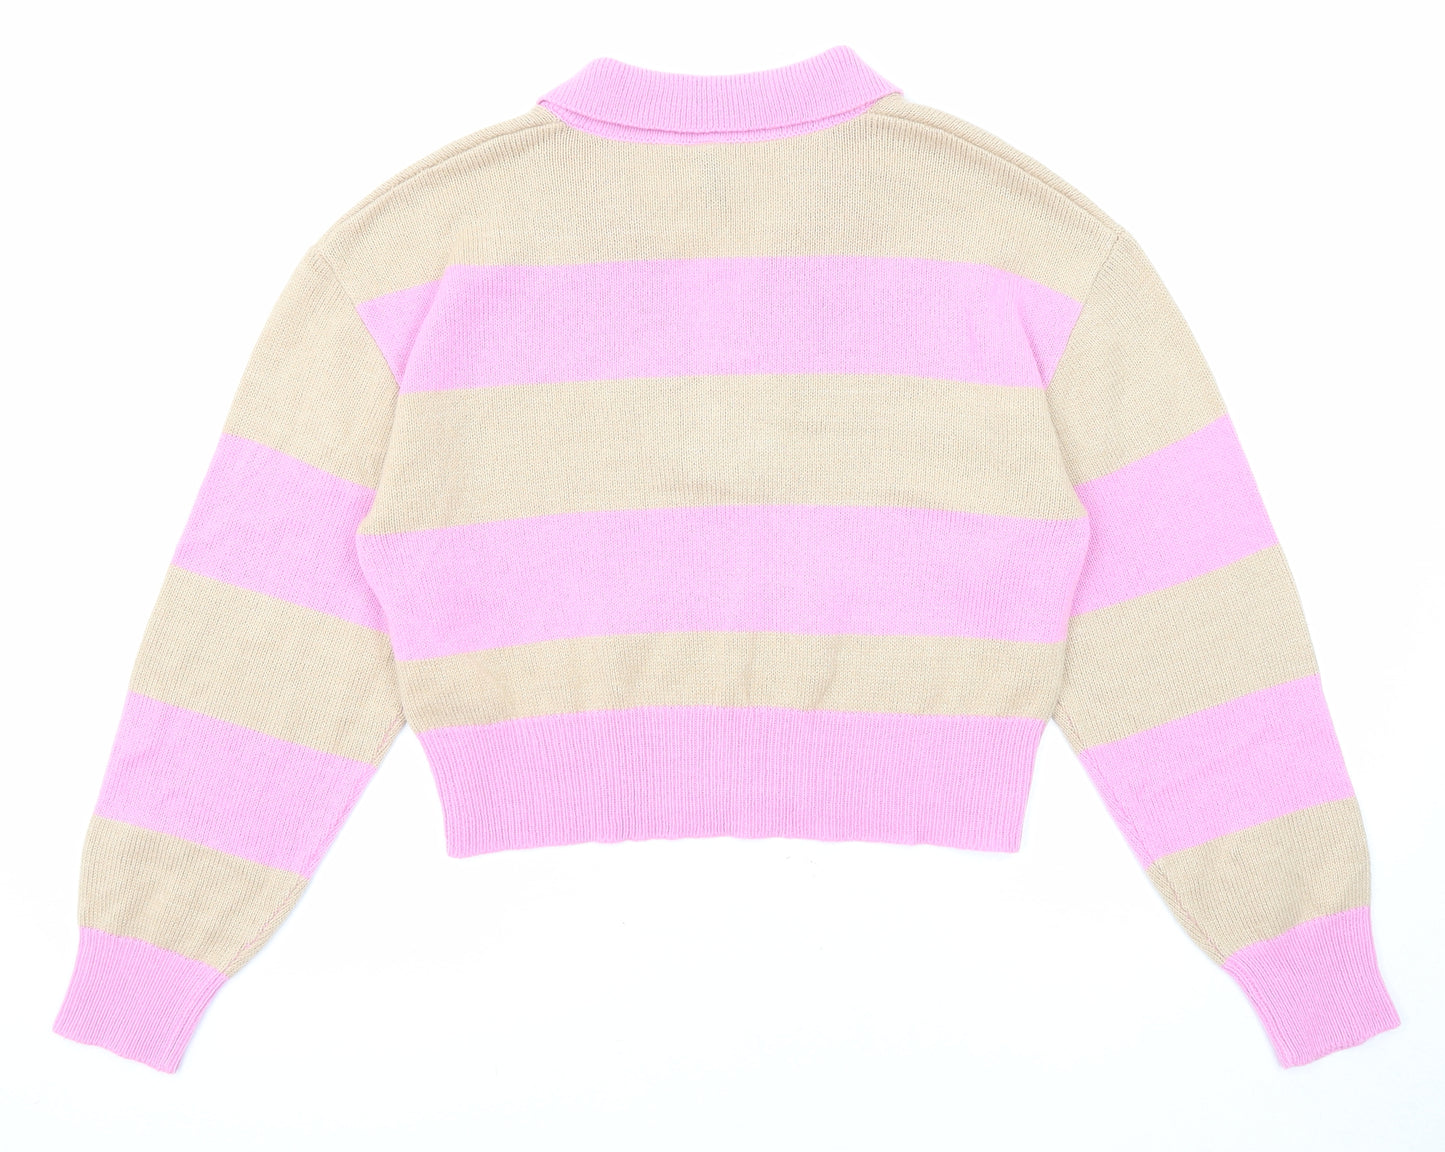 Divided by H&M Womens Pink Collared Striped Acrylic Pullover Jumper Size M